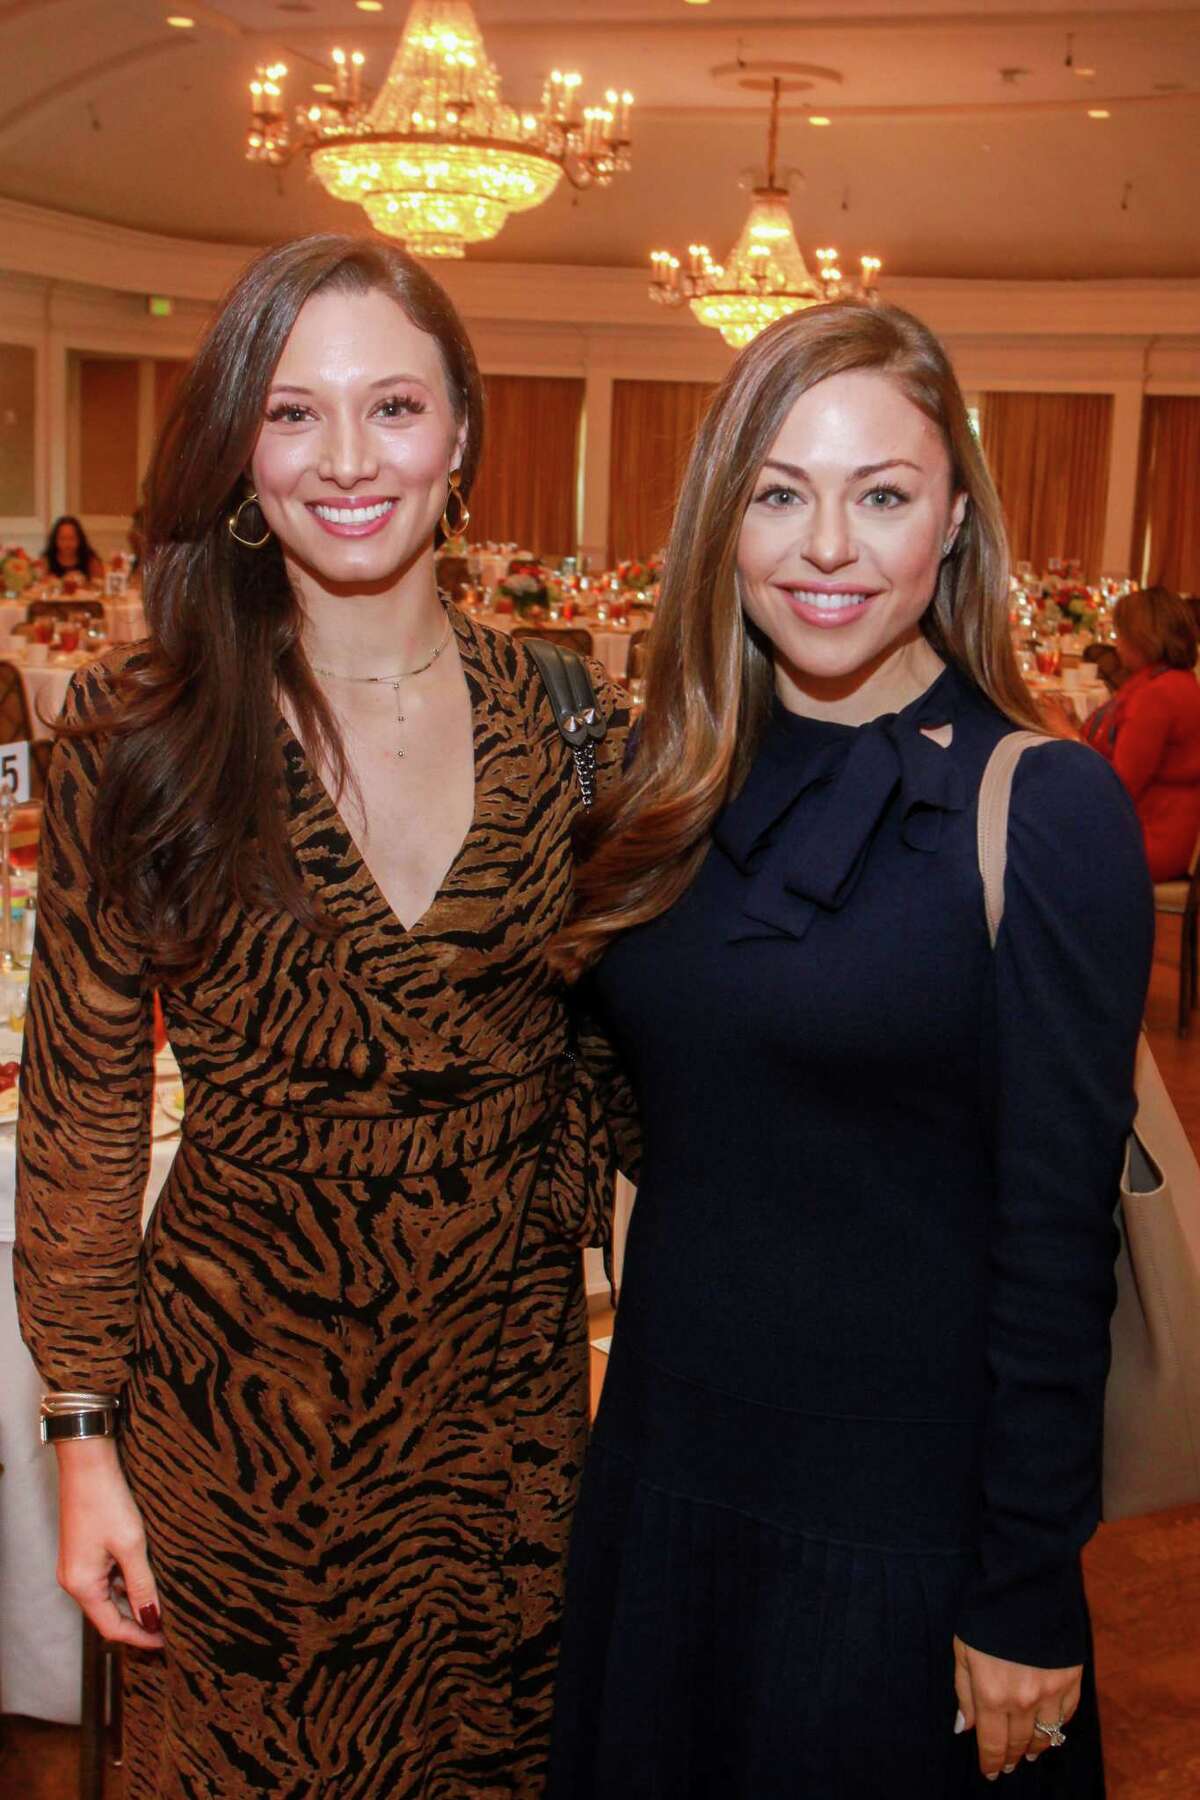 Kylie Bumgardner, left, and Lexi Sakowitz at the Baylor College of Medicine Teen Health Clinic's annual "Hope for the Future" luncheon at River Oaks Country Club on October 15, 2019.